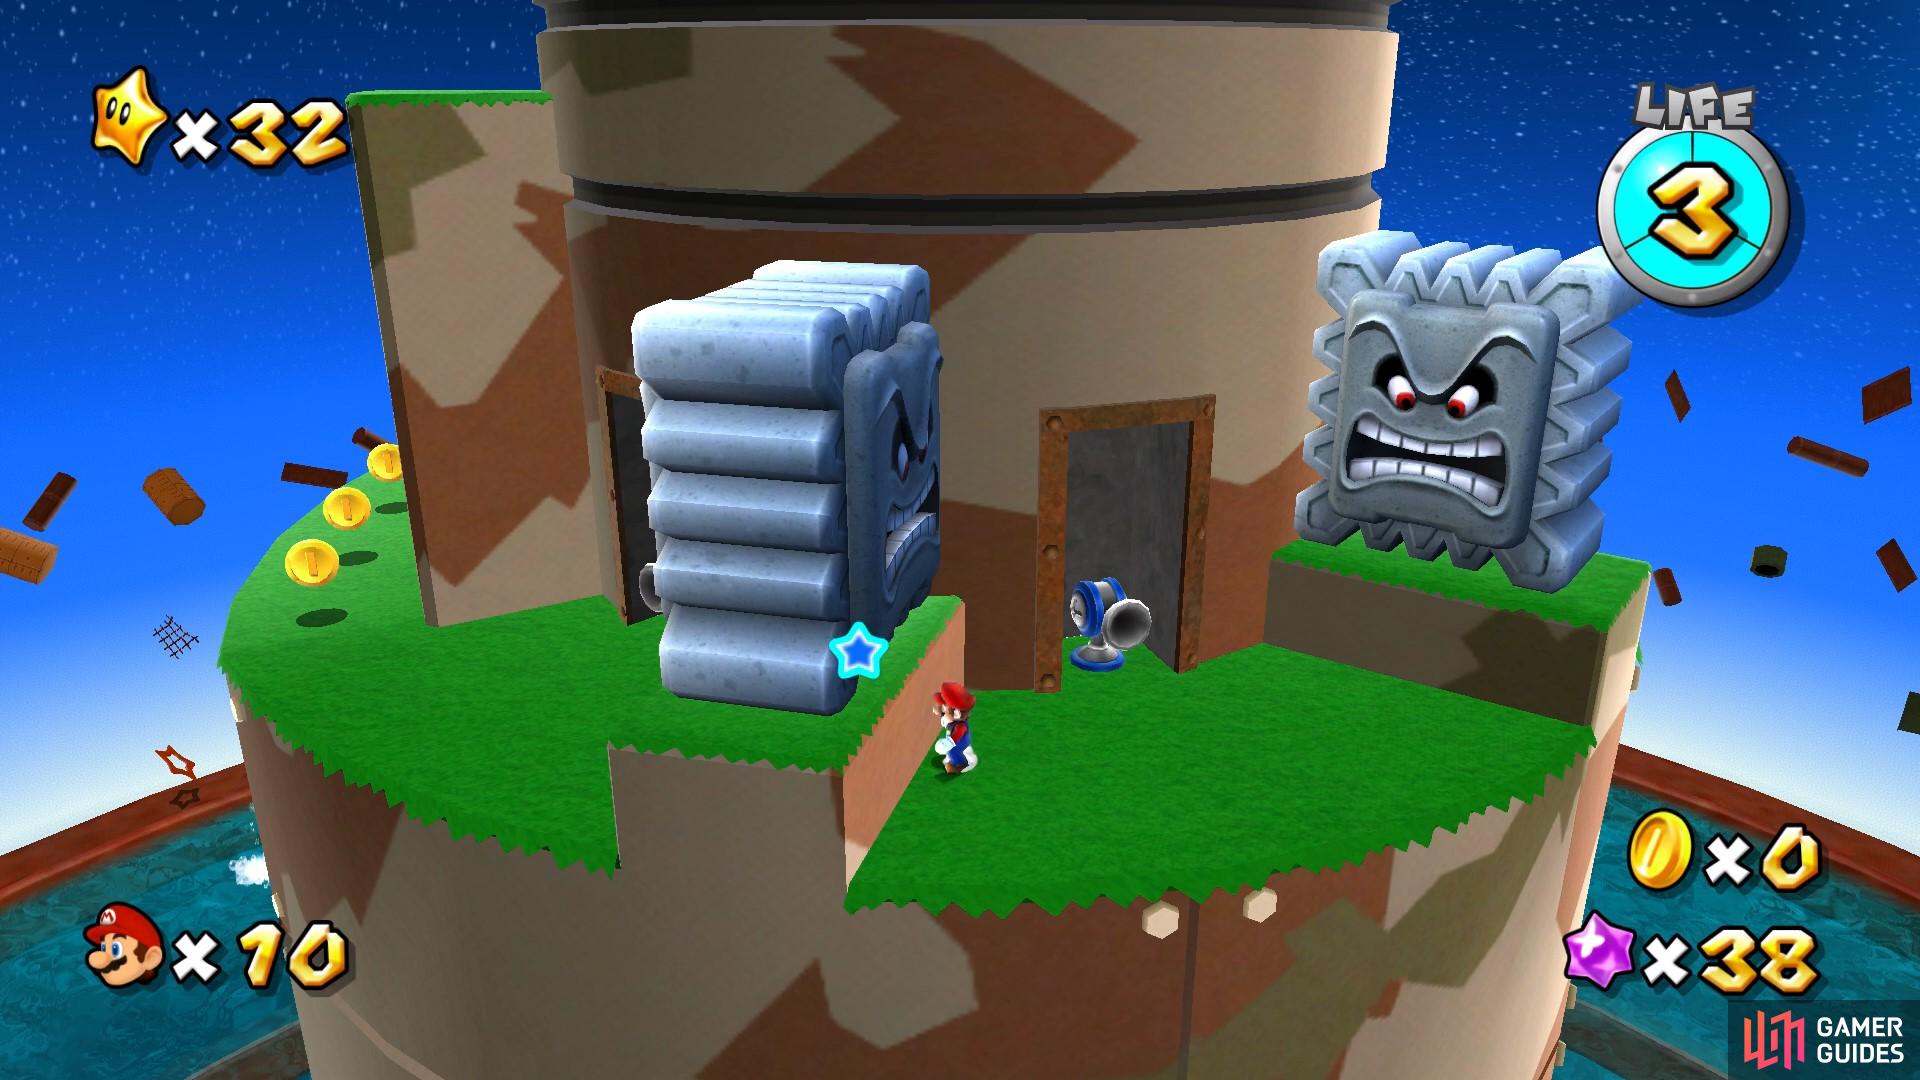 The Thwomps are angry and will crush you if given the chance.